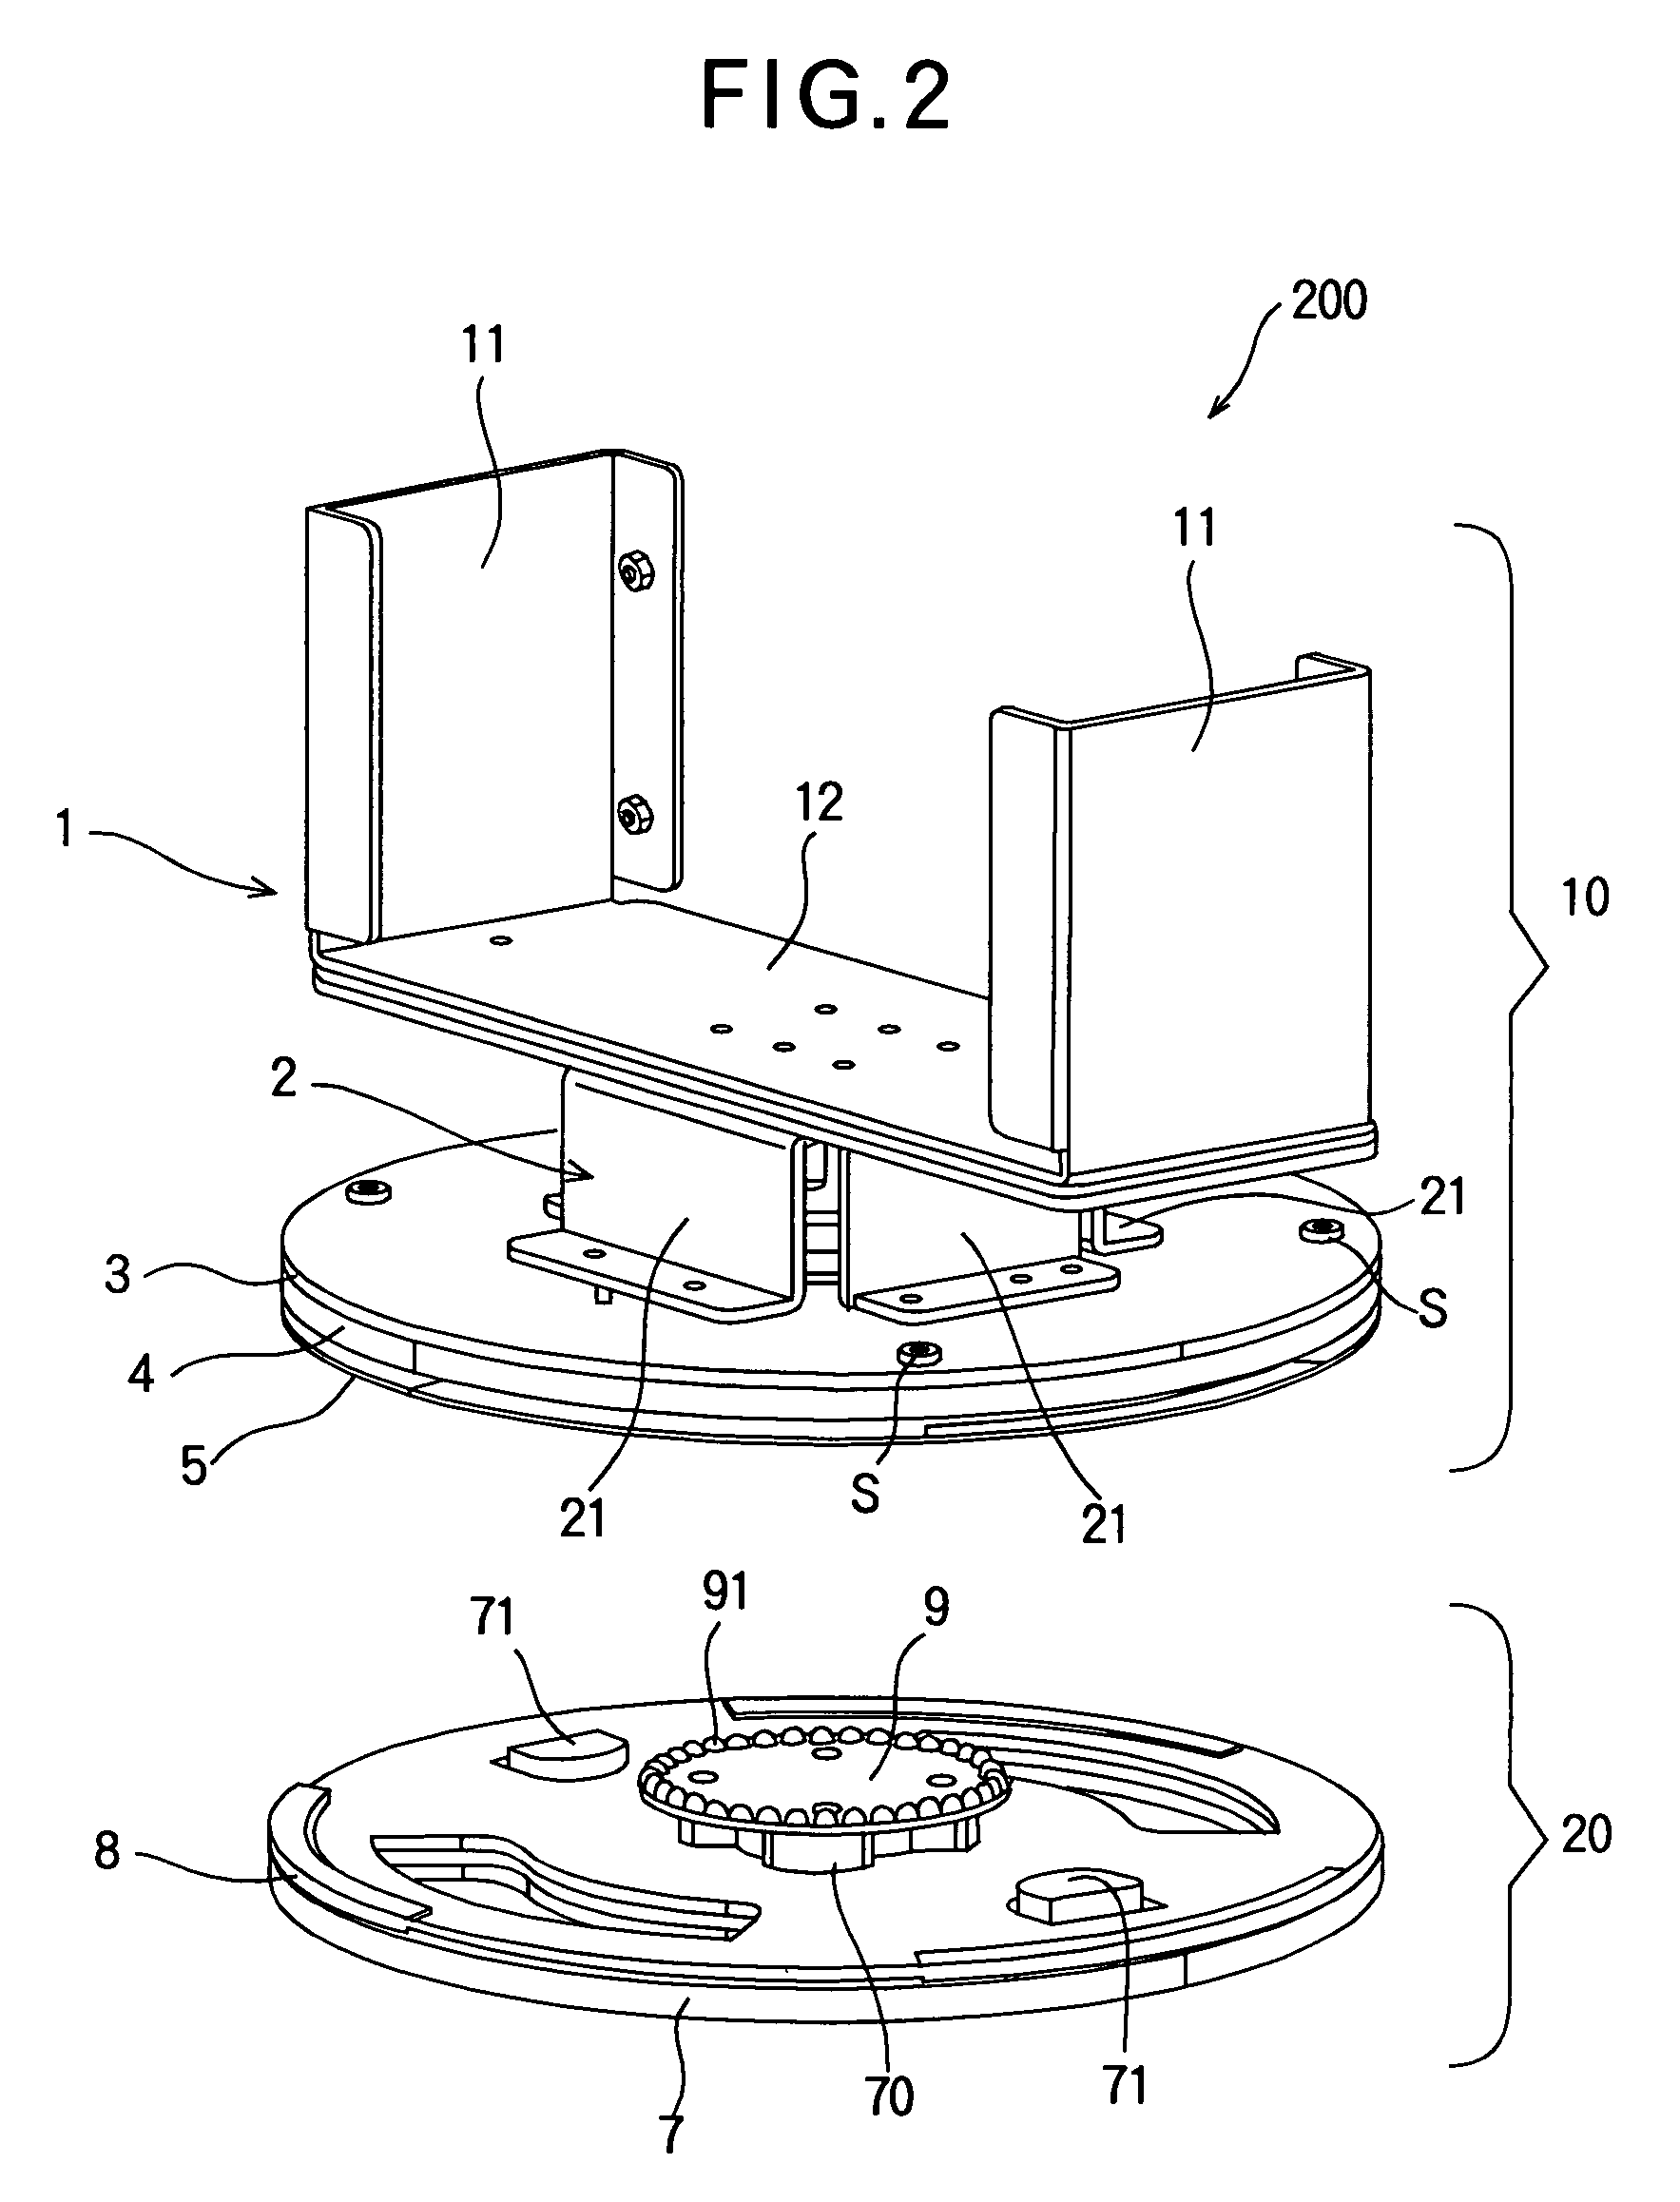 Turntable and display apparatus